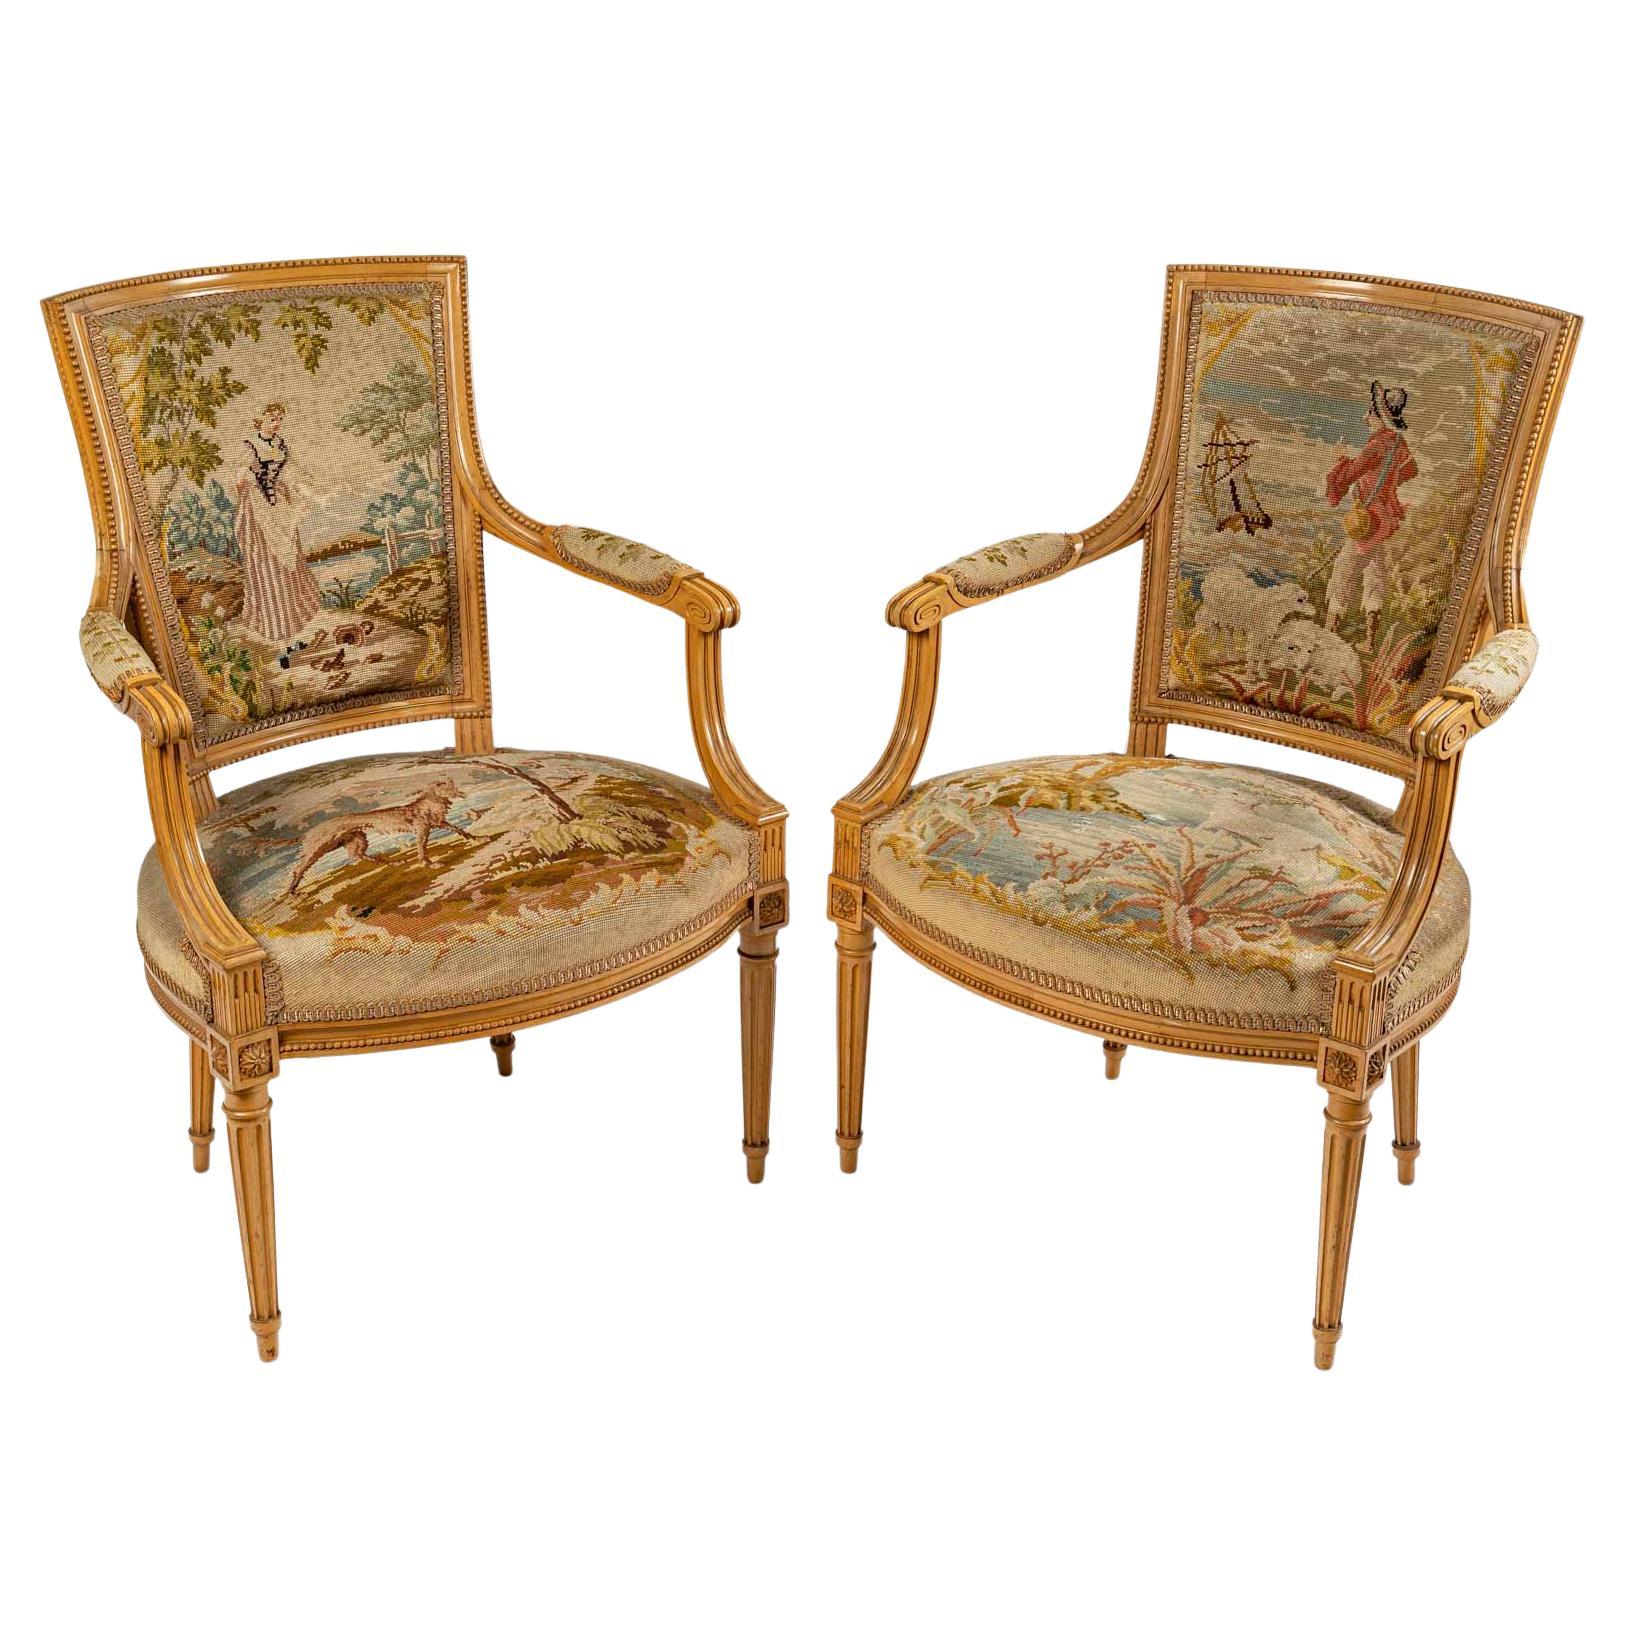 Pair of Cabriolet Armchairs in the Louis XVI Style, Sycamore Wood